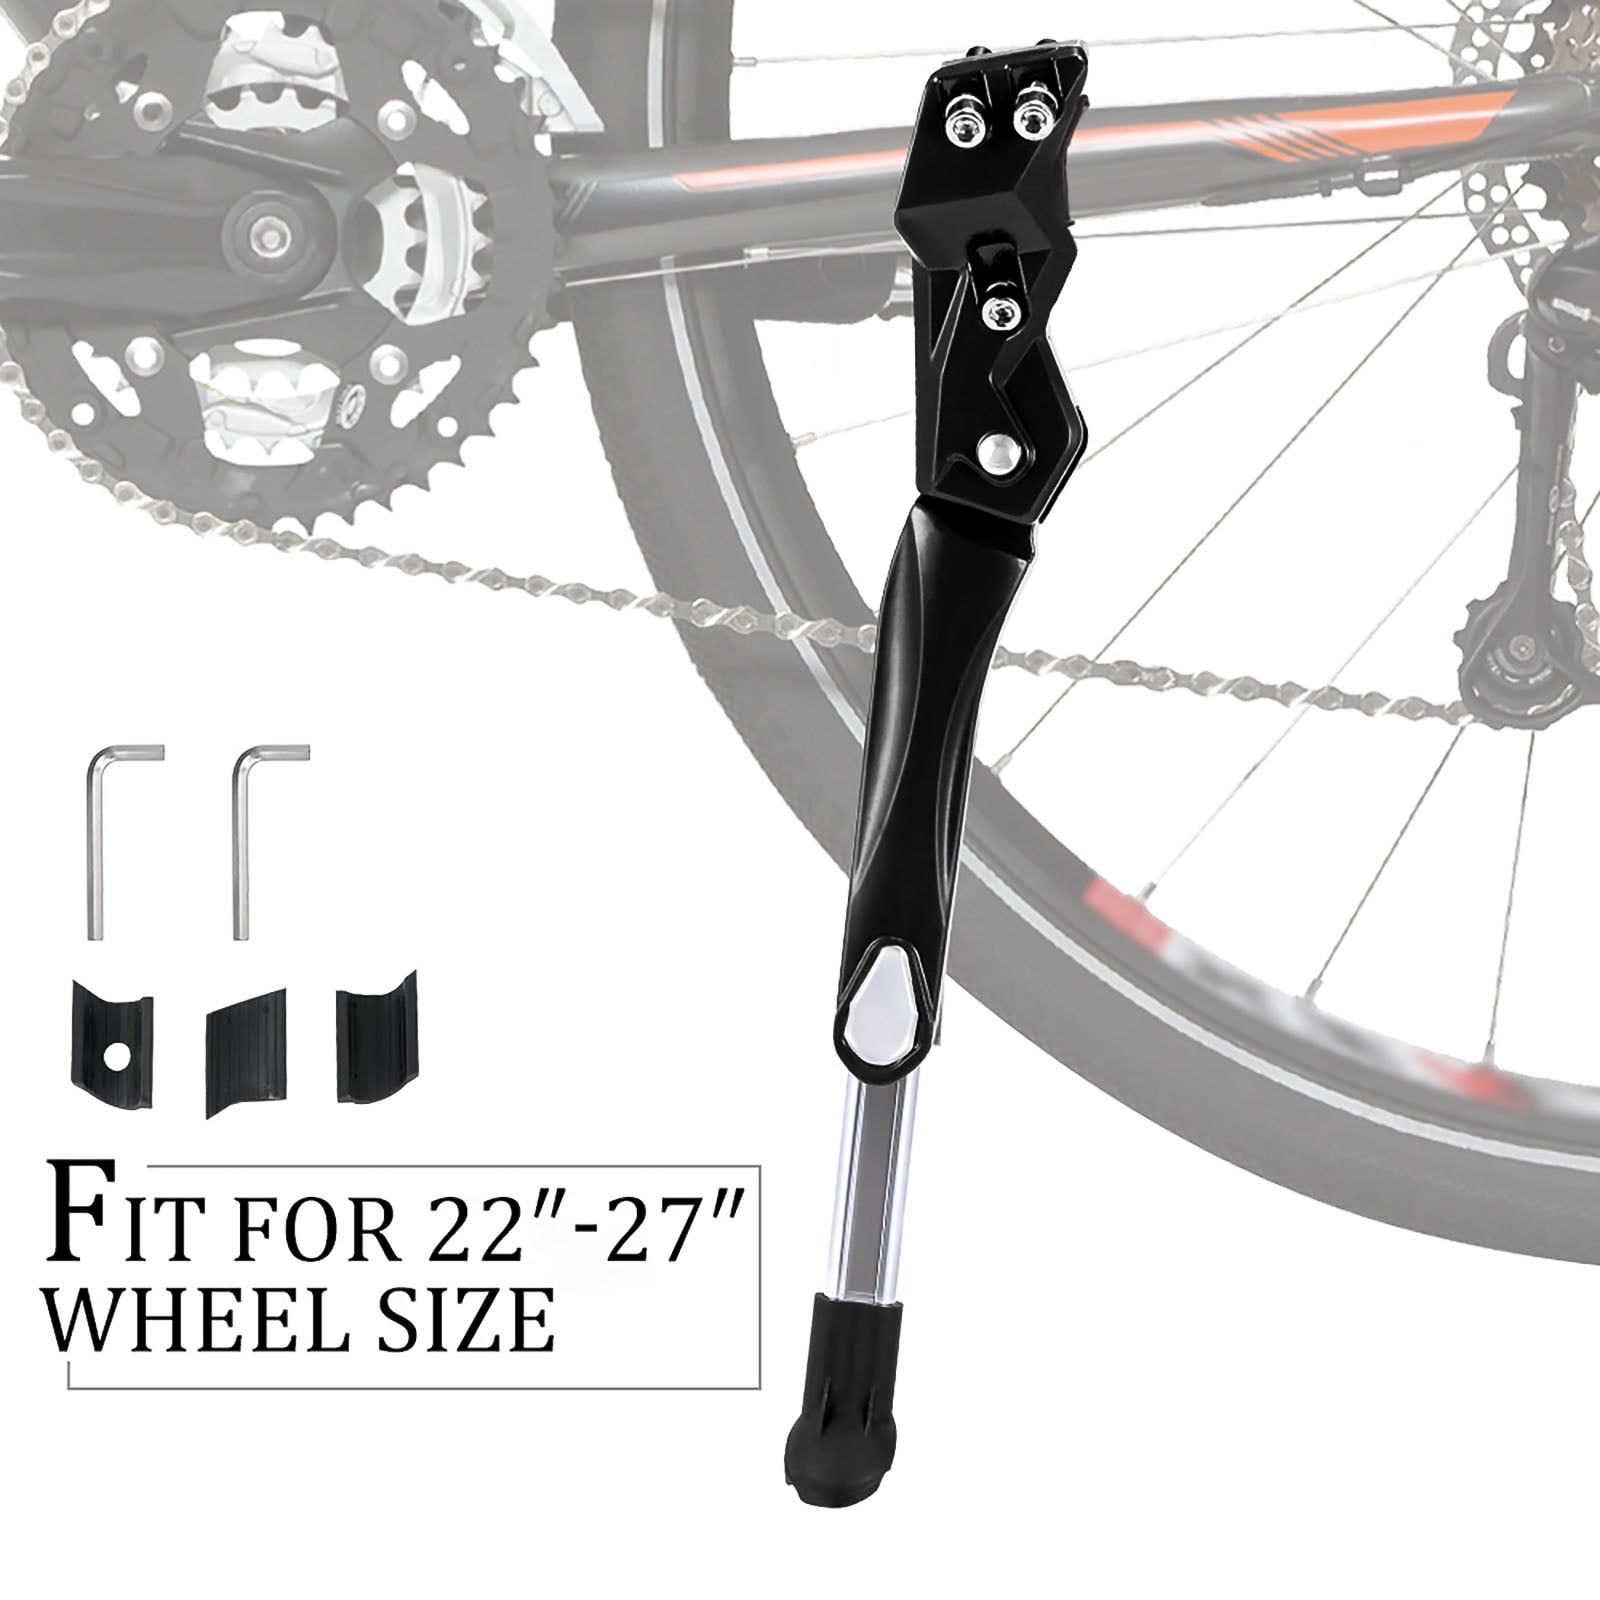 1PC Adjustable Bicycle Kickstand MTB Road Bicycle Parking Rack Alloy Bike Support Side Kick Stand Foot Black